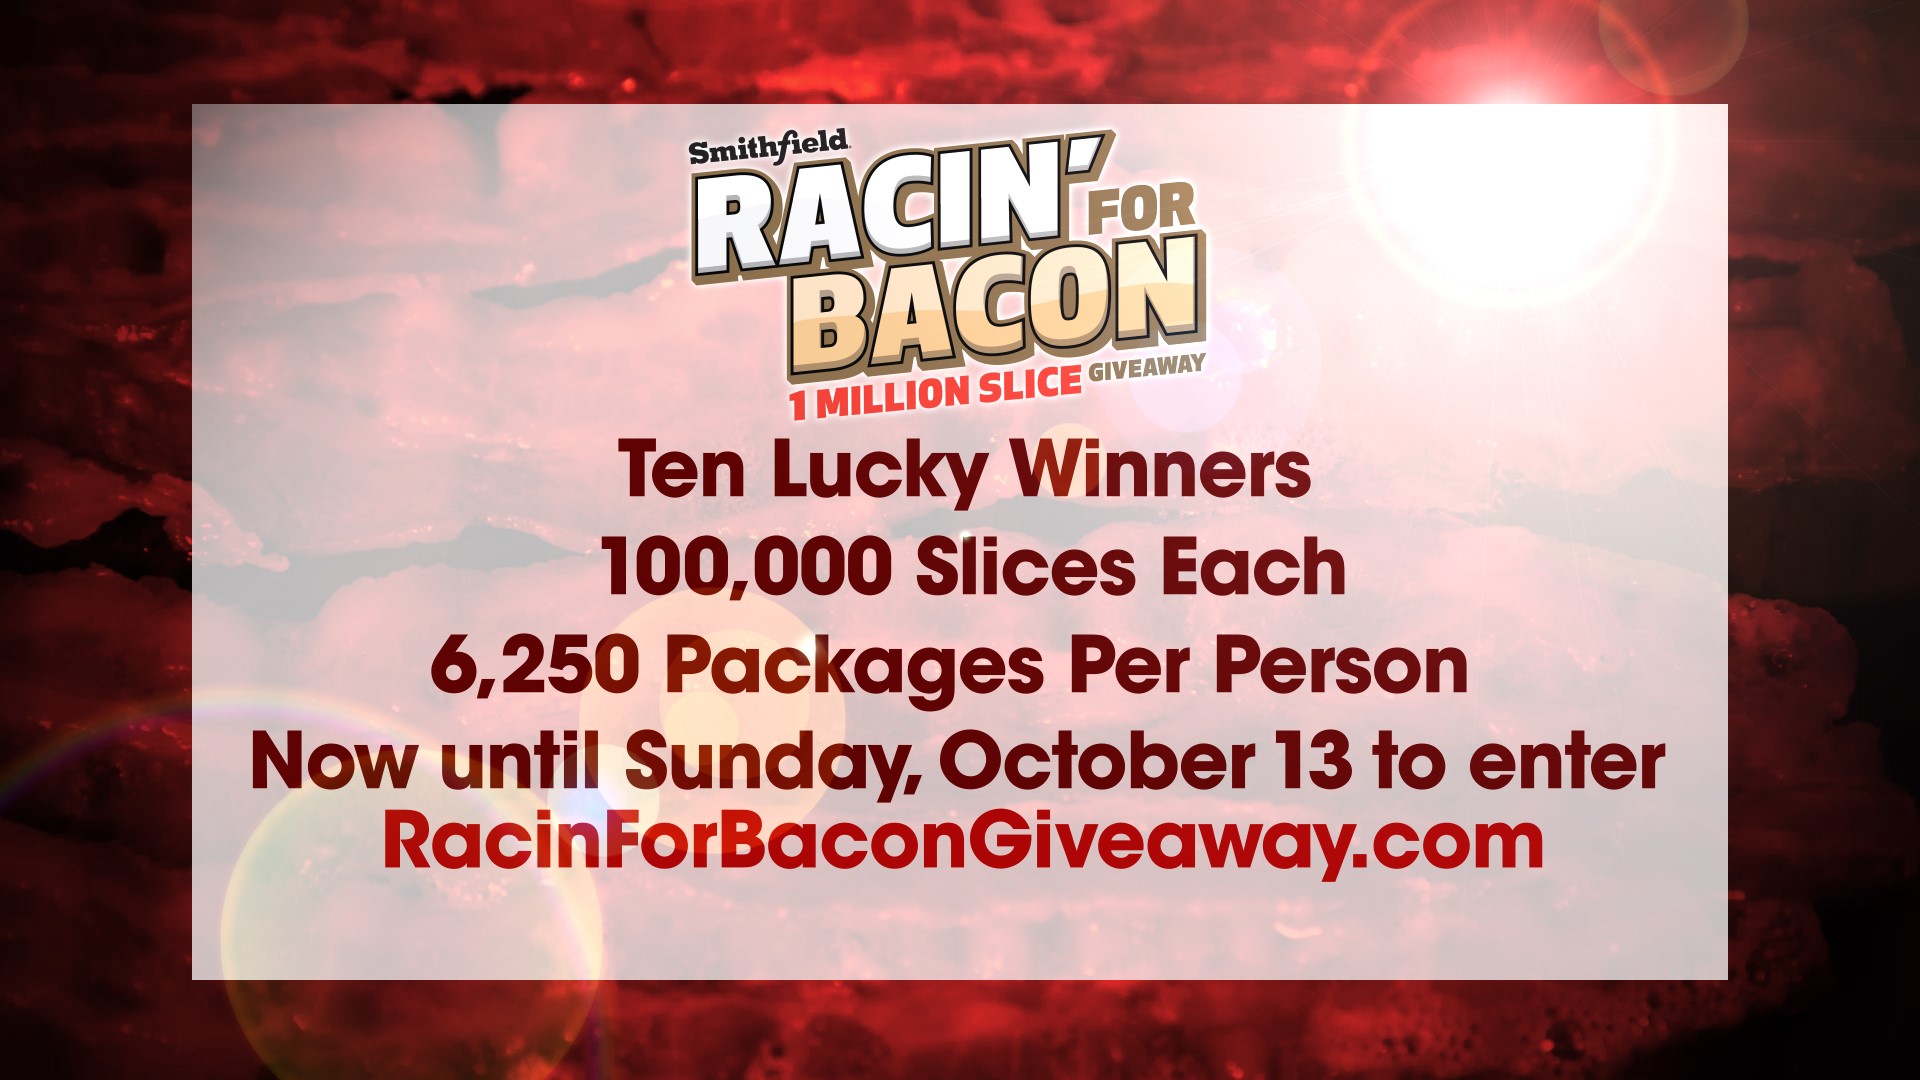 Calling all race fans and tailgate lovers! Learn about Smithfield's Racin' for Bacon 1 Million Slice Giveaway from Parker Wallace of Parker's Plate!